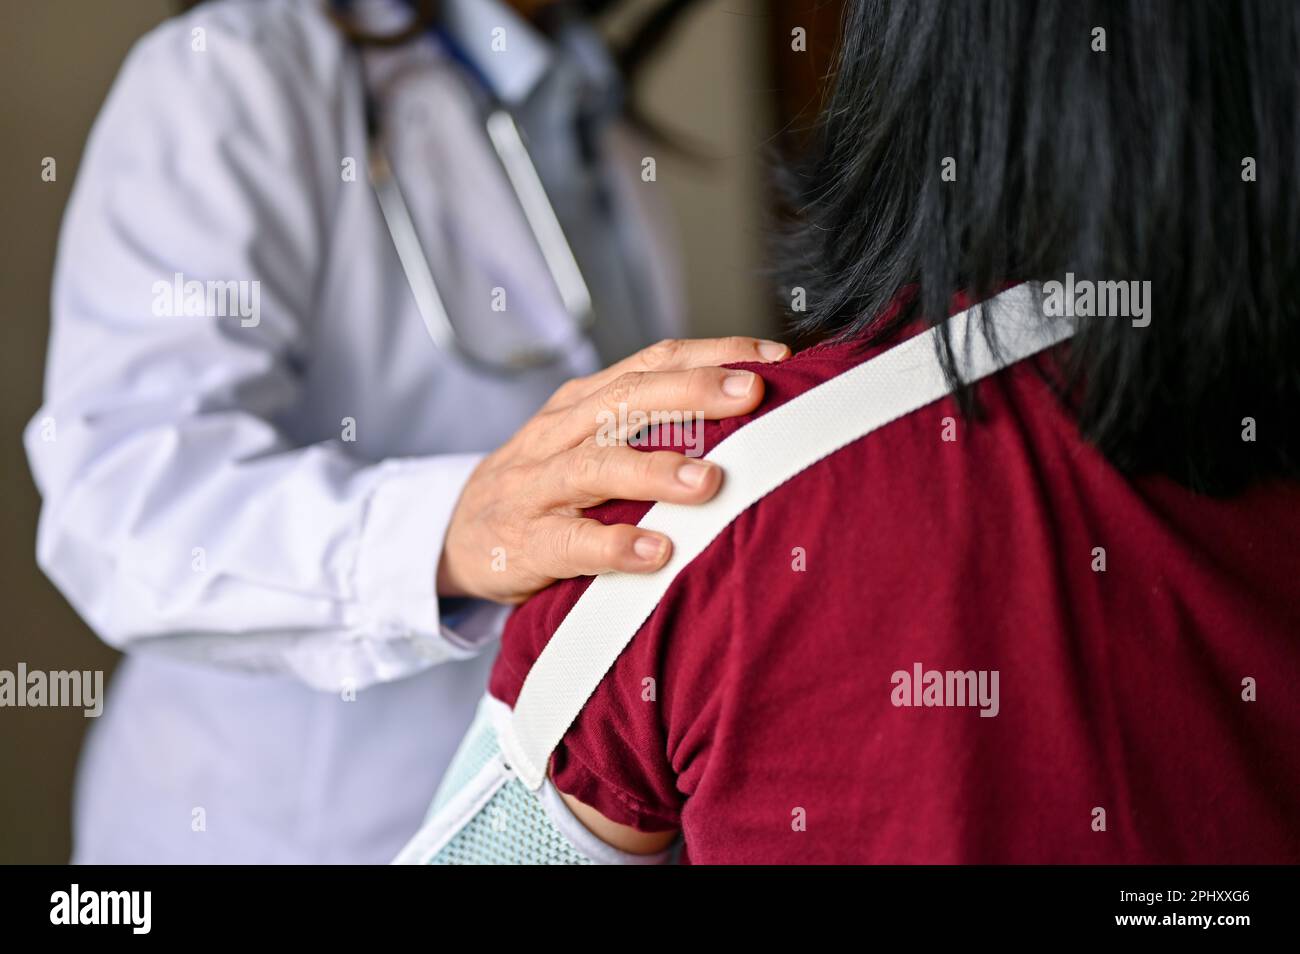 Close-up image of an orthopedic doctor touching a patient's shoulder to comfort and reassure. Stock Photo